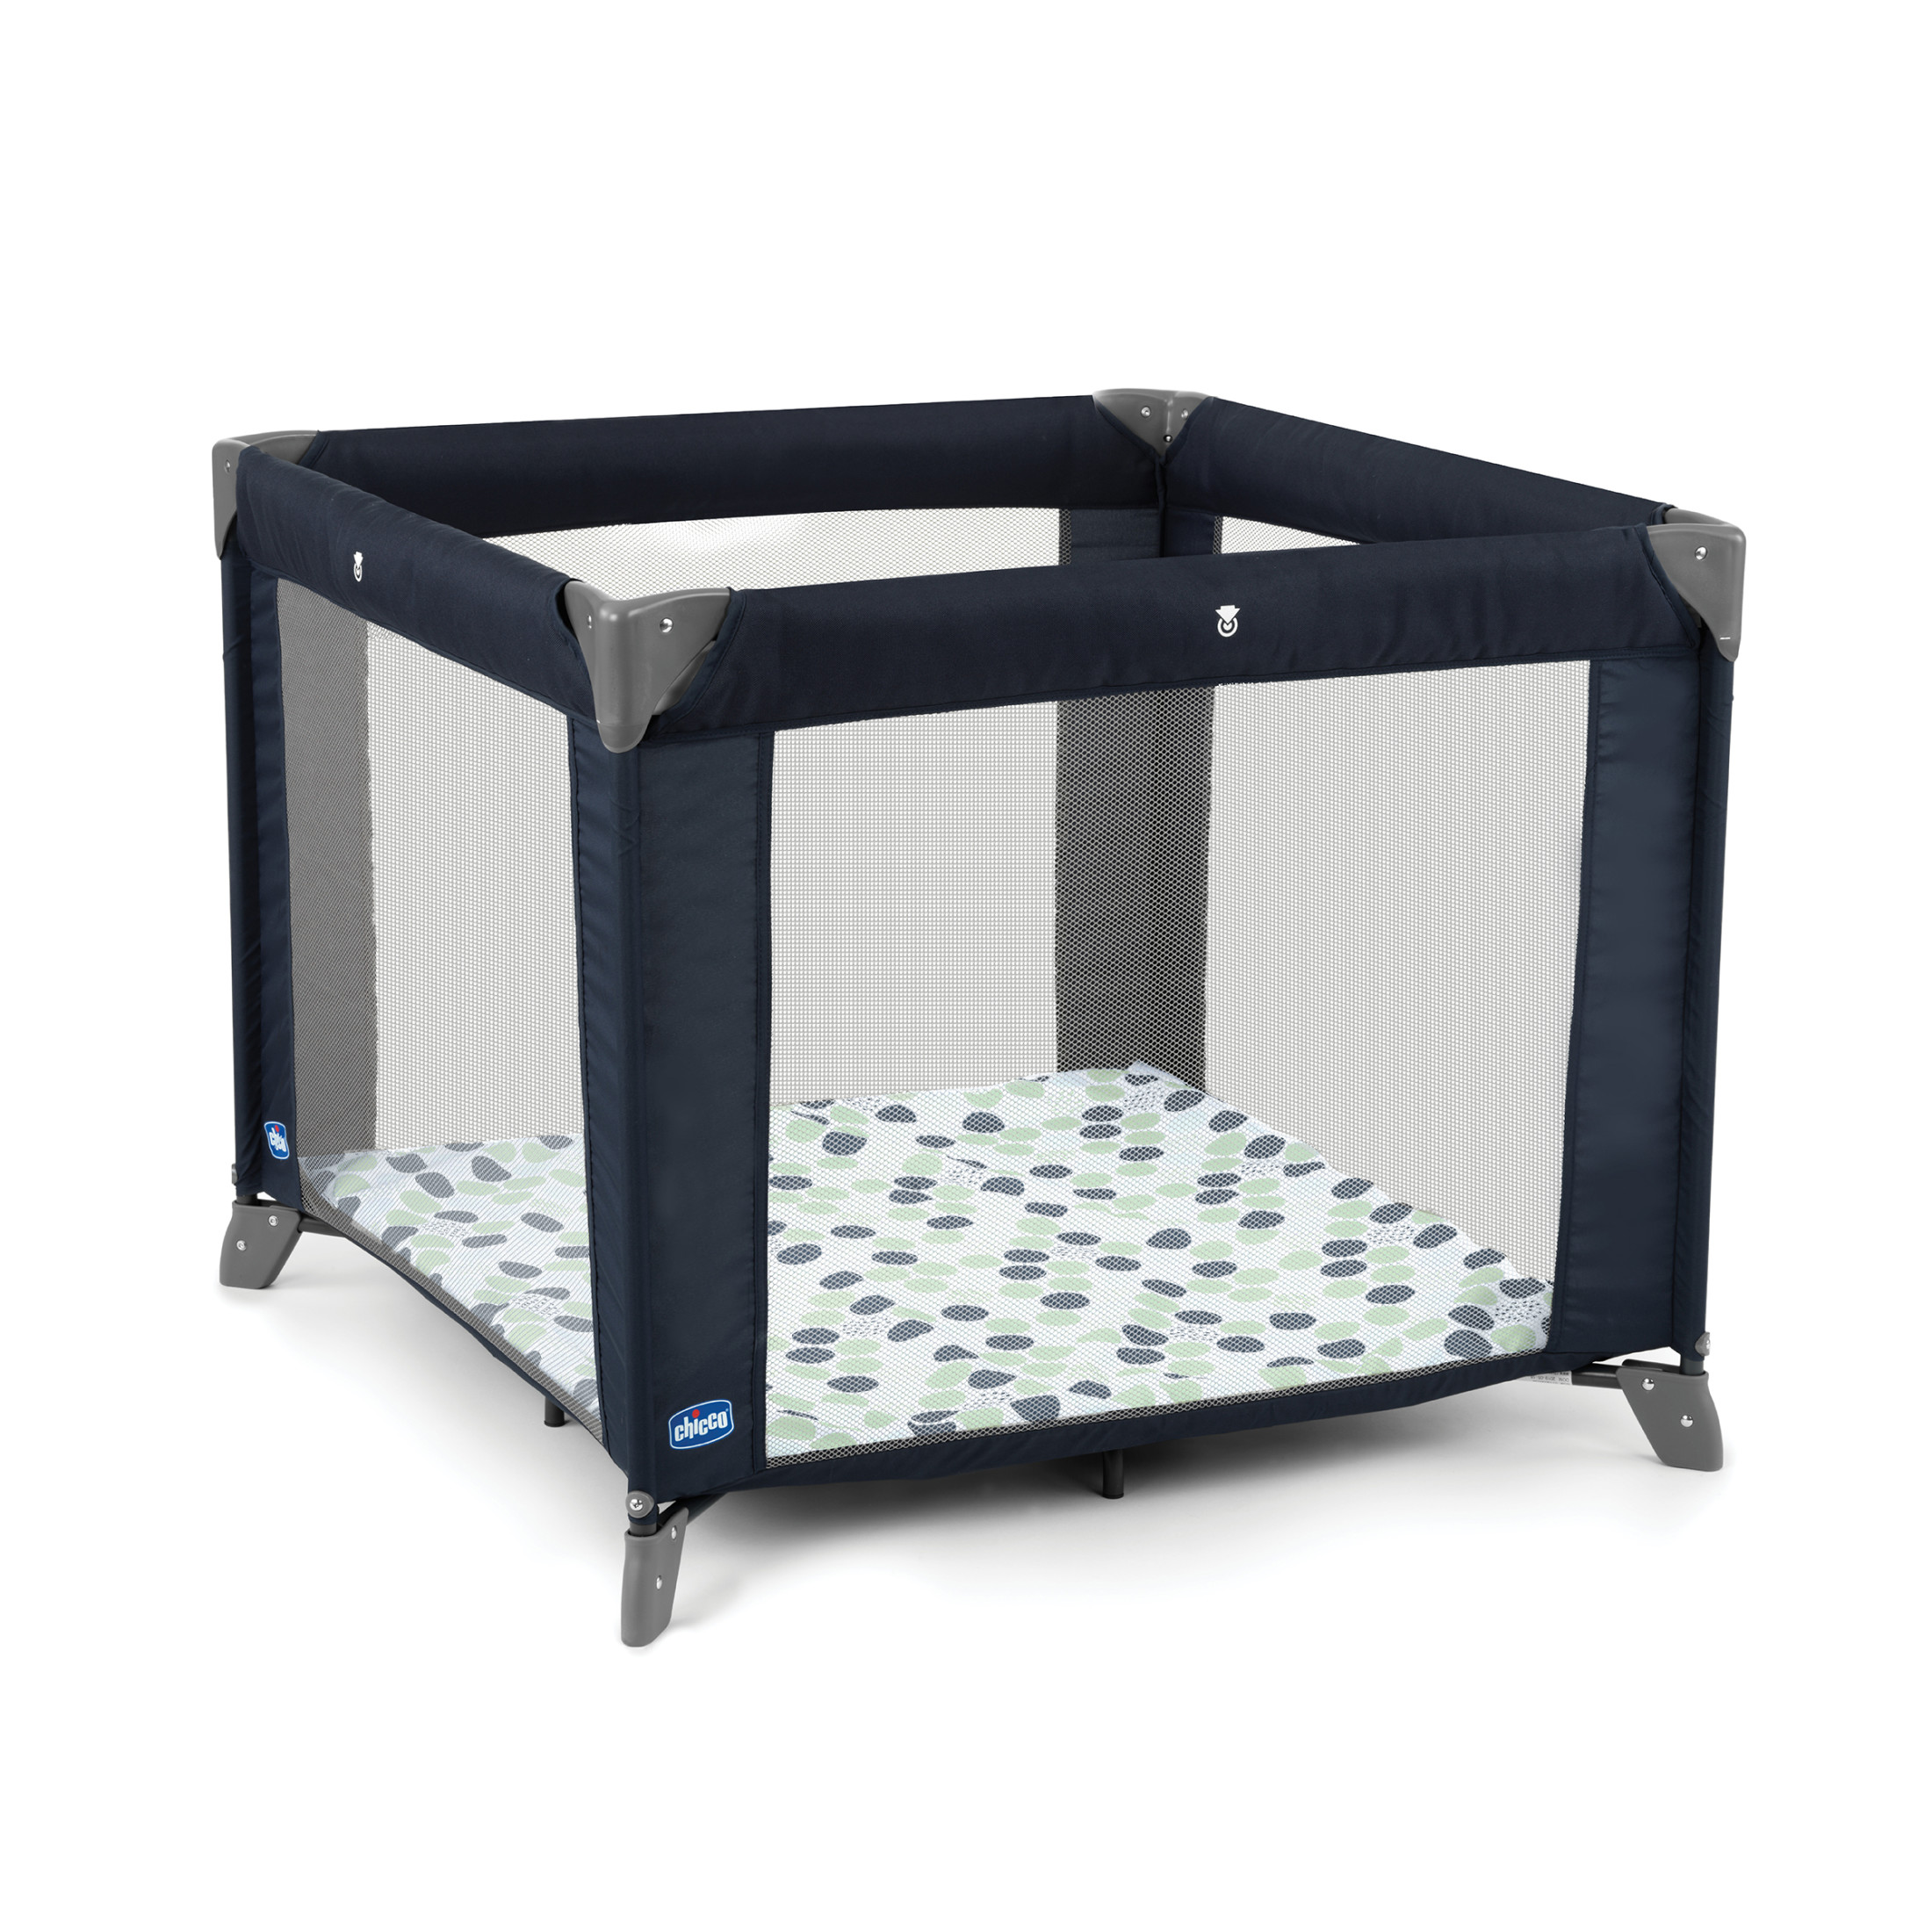 Chicco Tot Quad Portable Square Baby Playpen - Confetti (Blue) - image 1 of 7